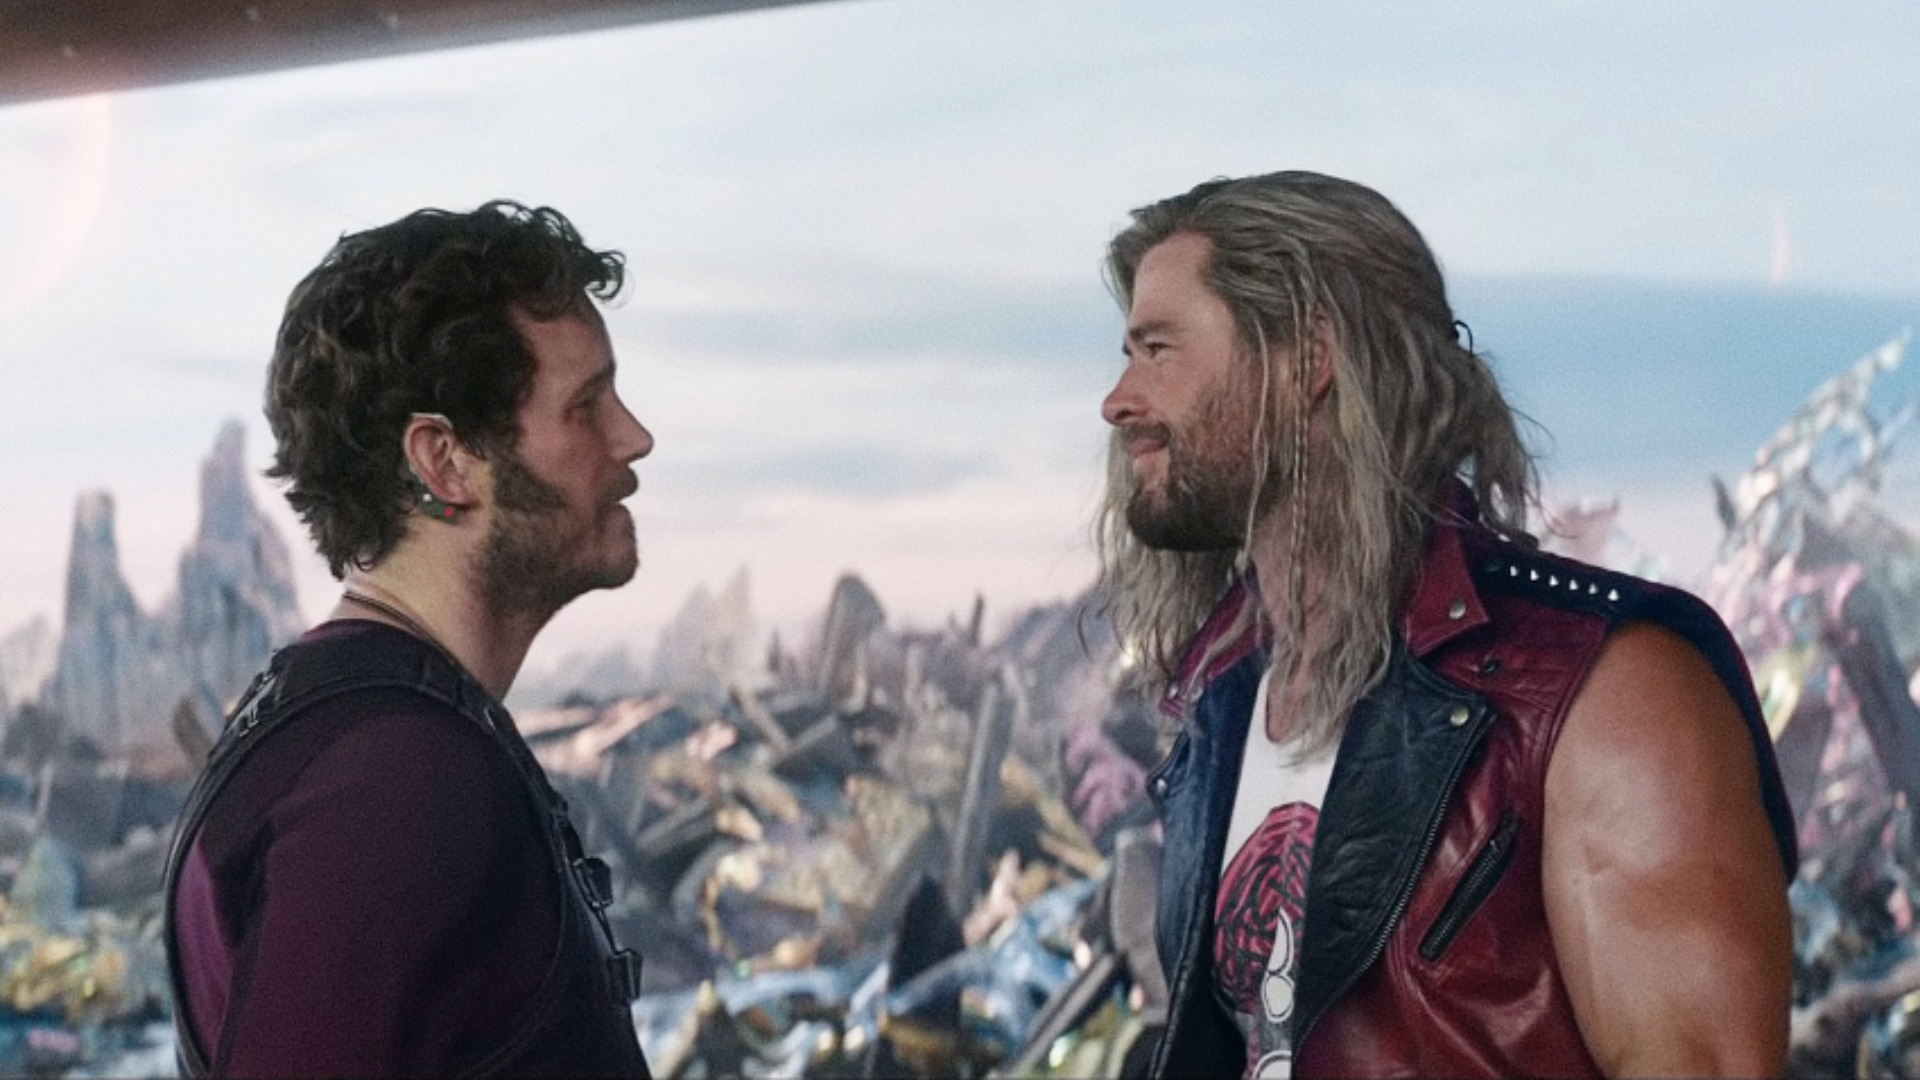 Chris Pratt on working with Hemsworth in Thor 4: “I loved every minute”